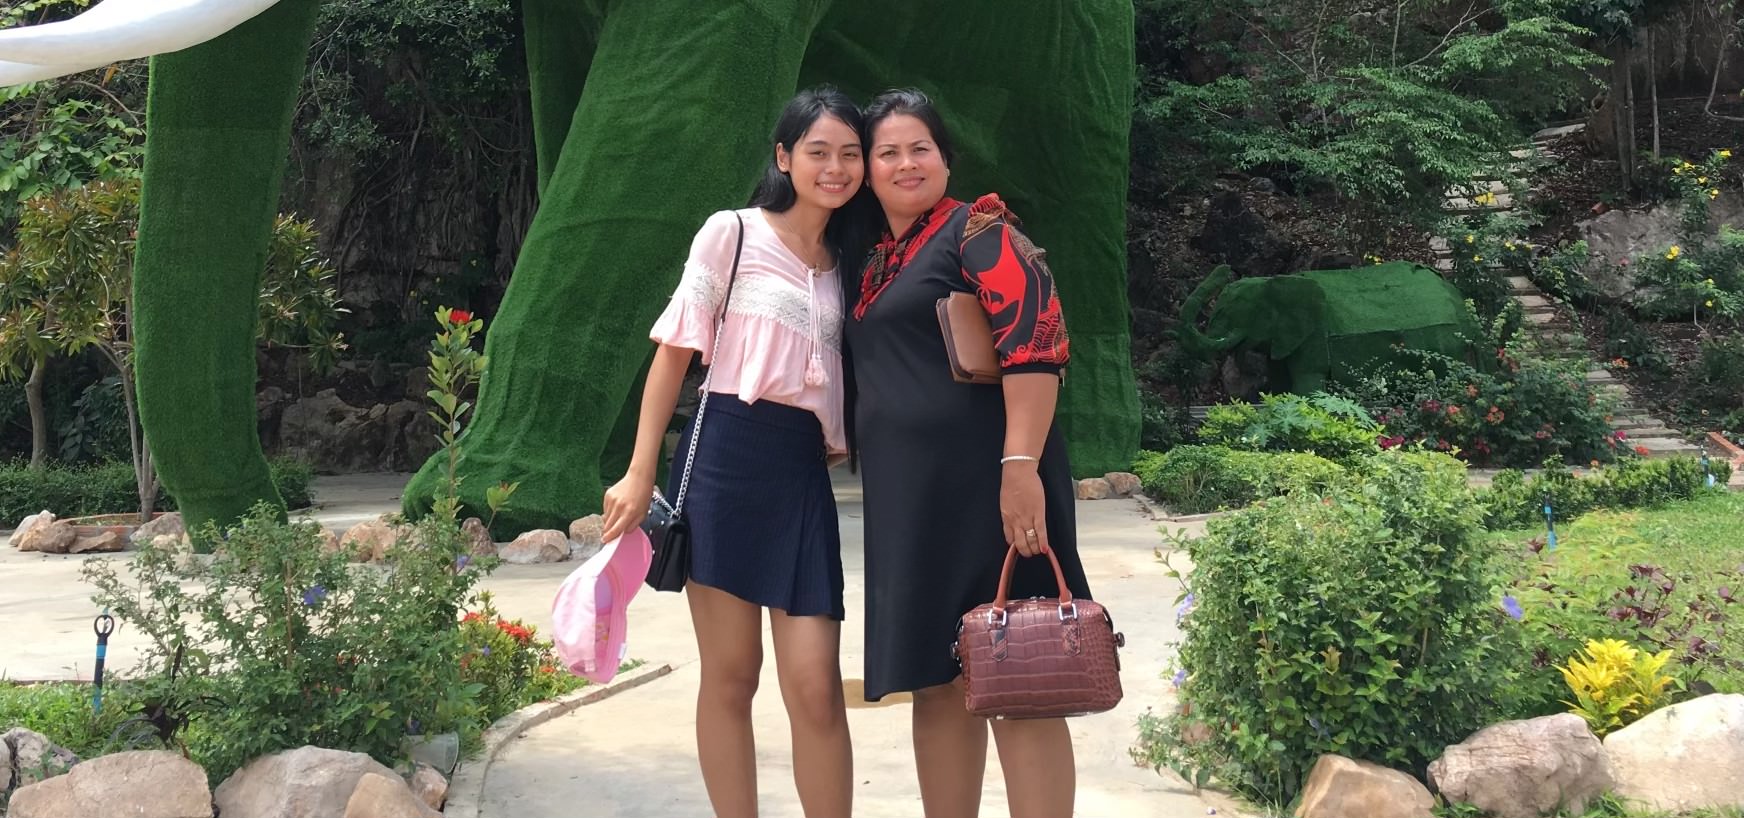 What I Learned from my Mom: A Reflection on the Project from Hillory Suy